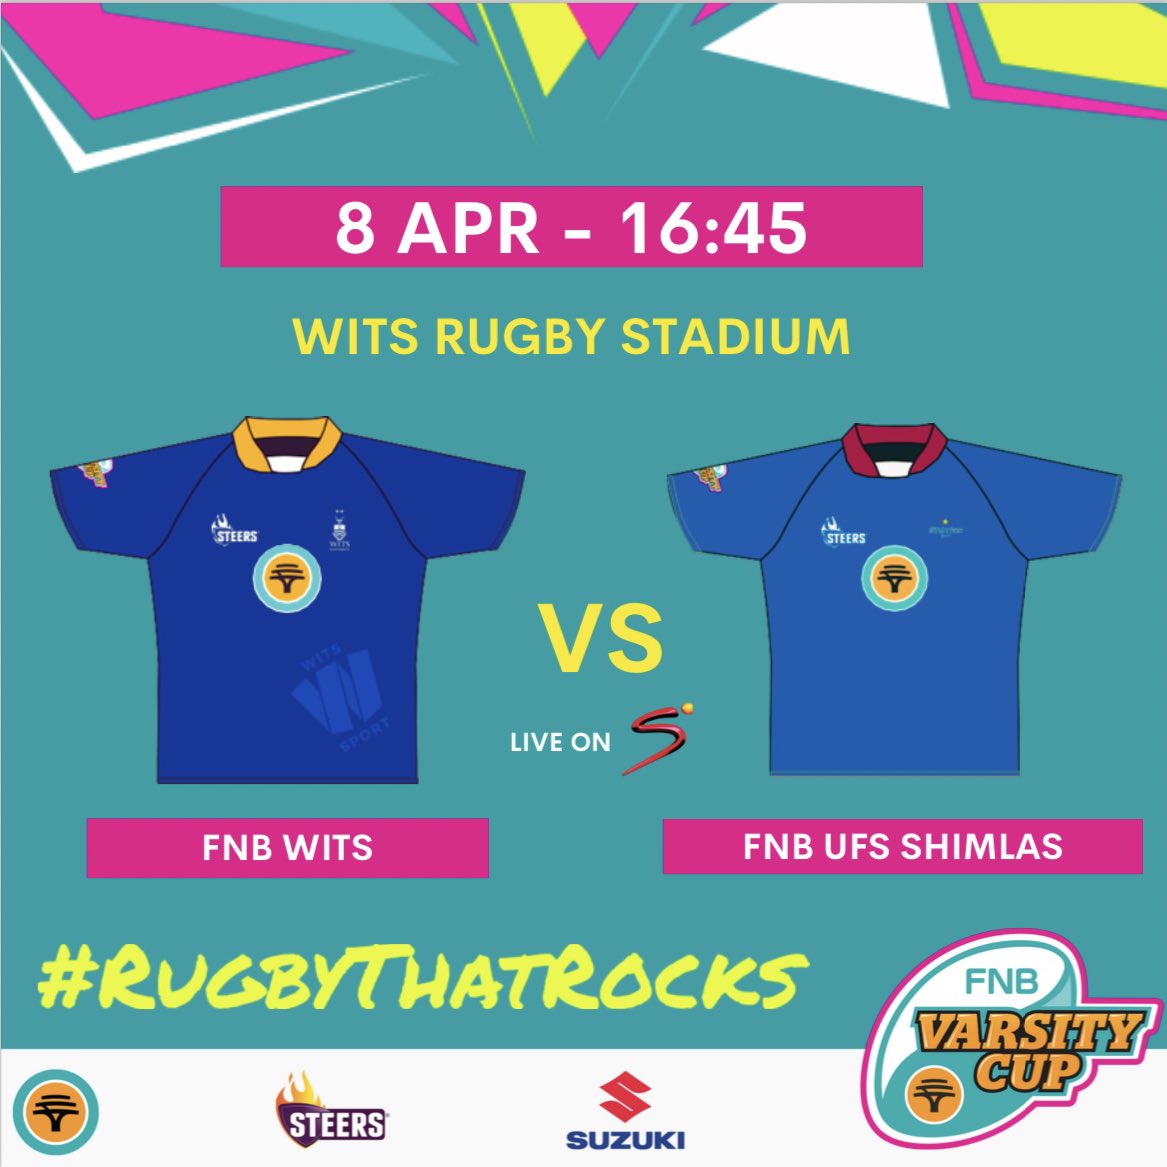 Fixture Alert!!🚨 Mondays are for rugby!🏉 📆8 April 2023 📍Wits Rugby Stadium 📍16:45 🎟️Tickets available online - ticketpros.co.za/portal/web/ind… NB: R25 Open Stand tickets R30 Main Stand tickets #rugbythatrocks #ilovewitsilovetheblues